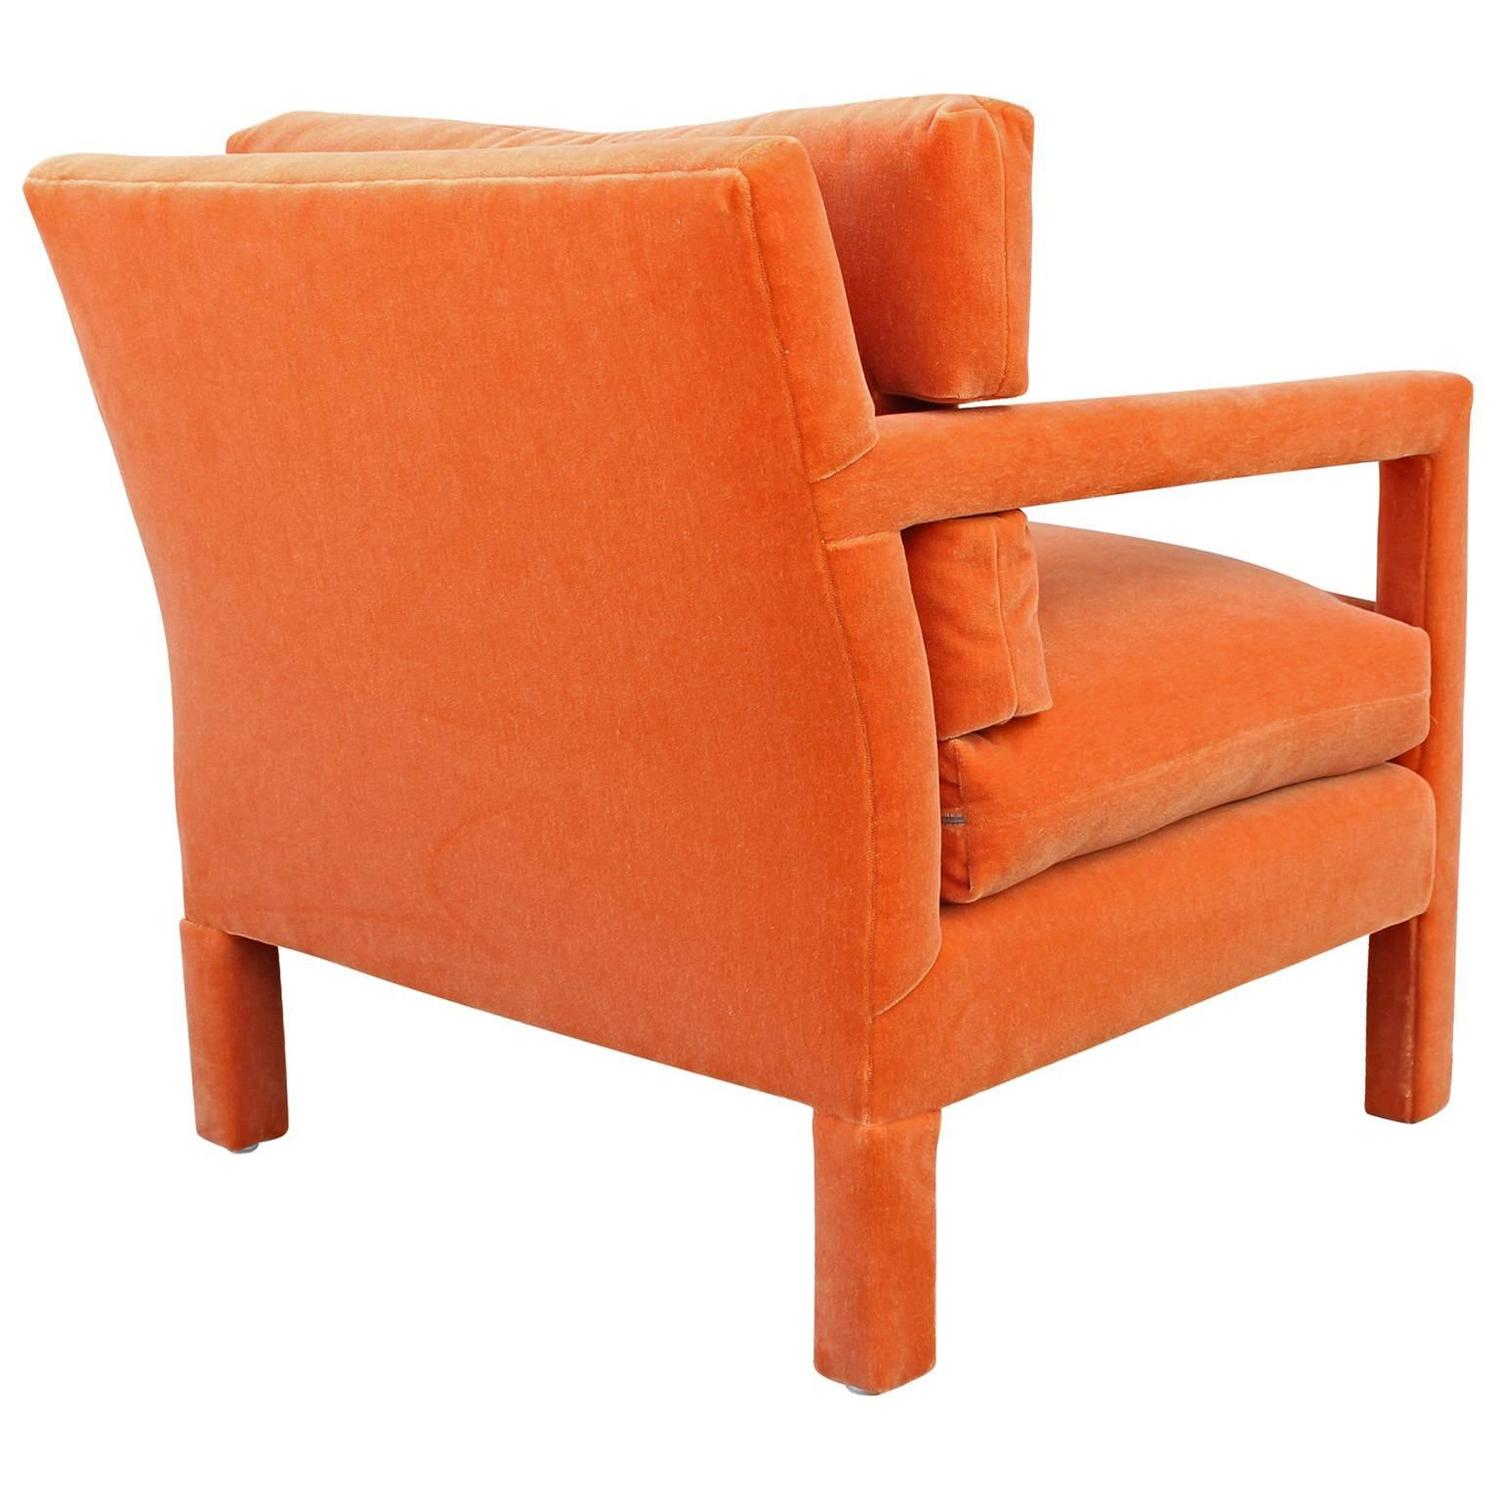 Fabulous Pair of Milo Baughman Parsons Style Chairs in Orange Mohair ...